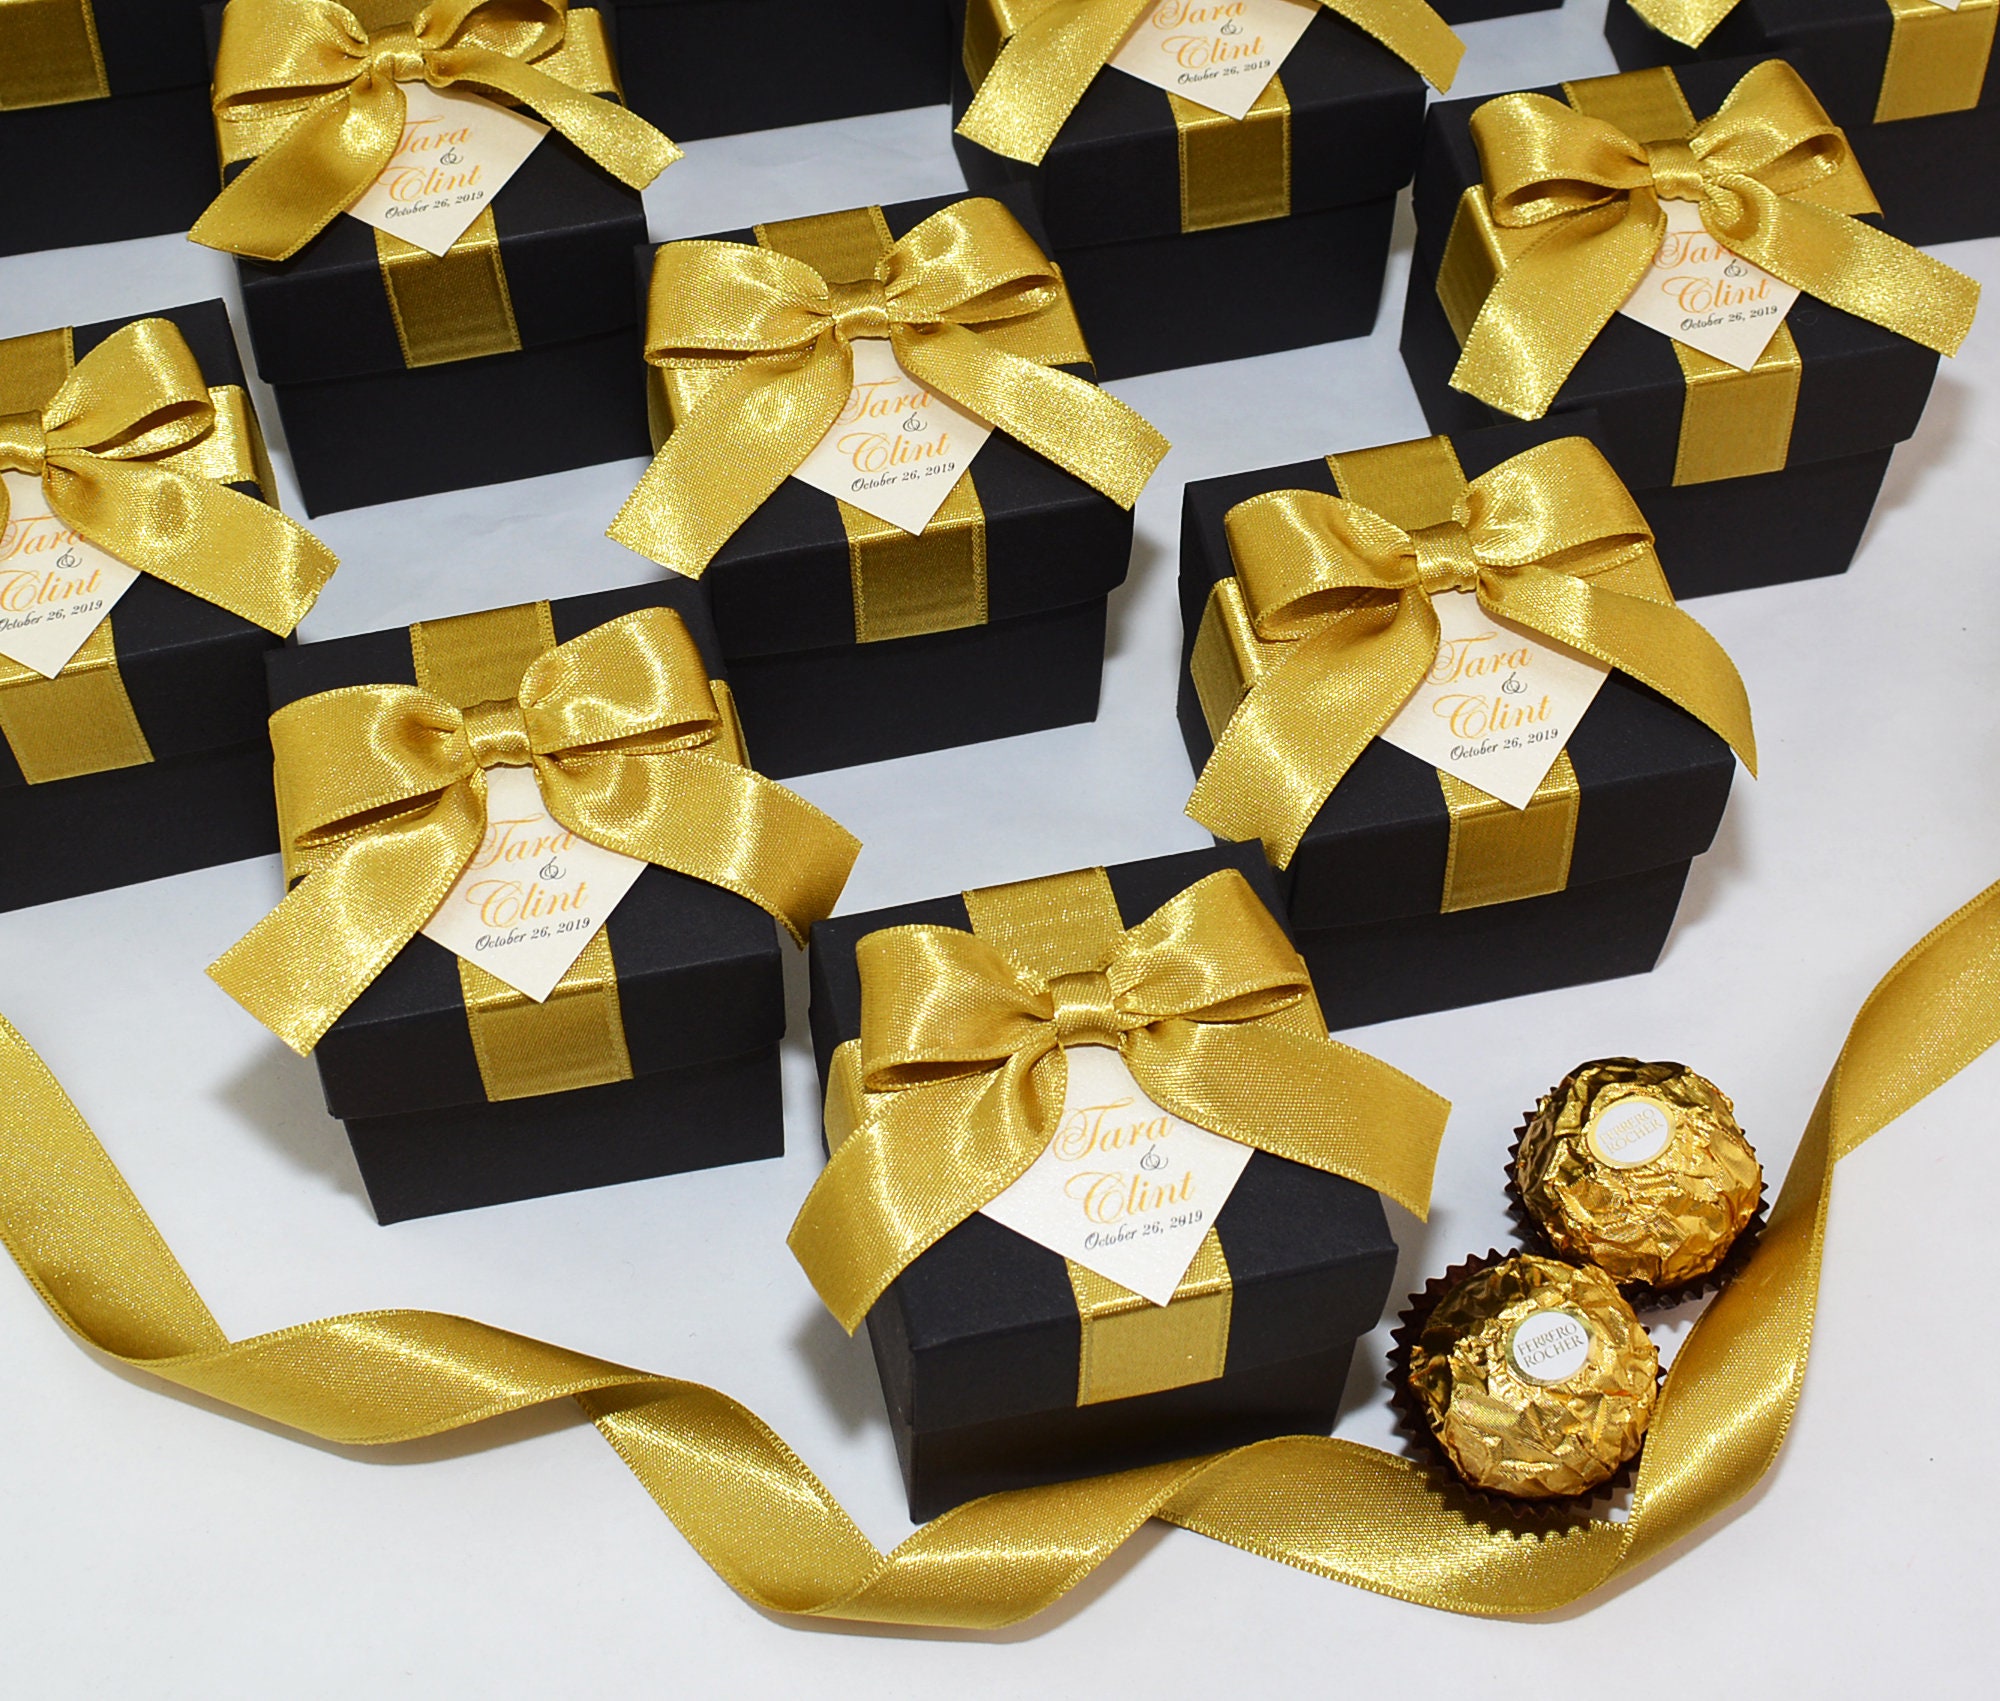 Details about   Gift Box With Gold Bow Ribbon Metal Flowers Party Favors Supplies Decorations 